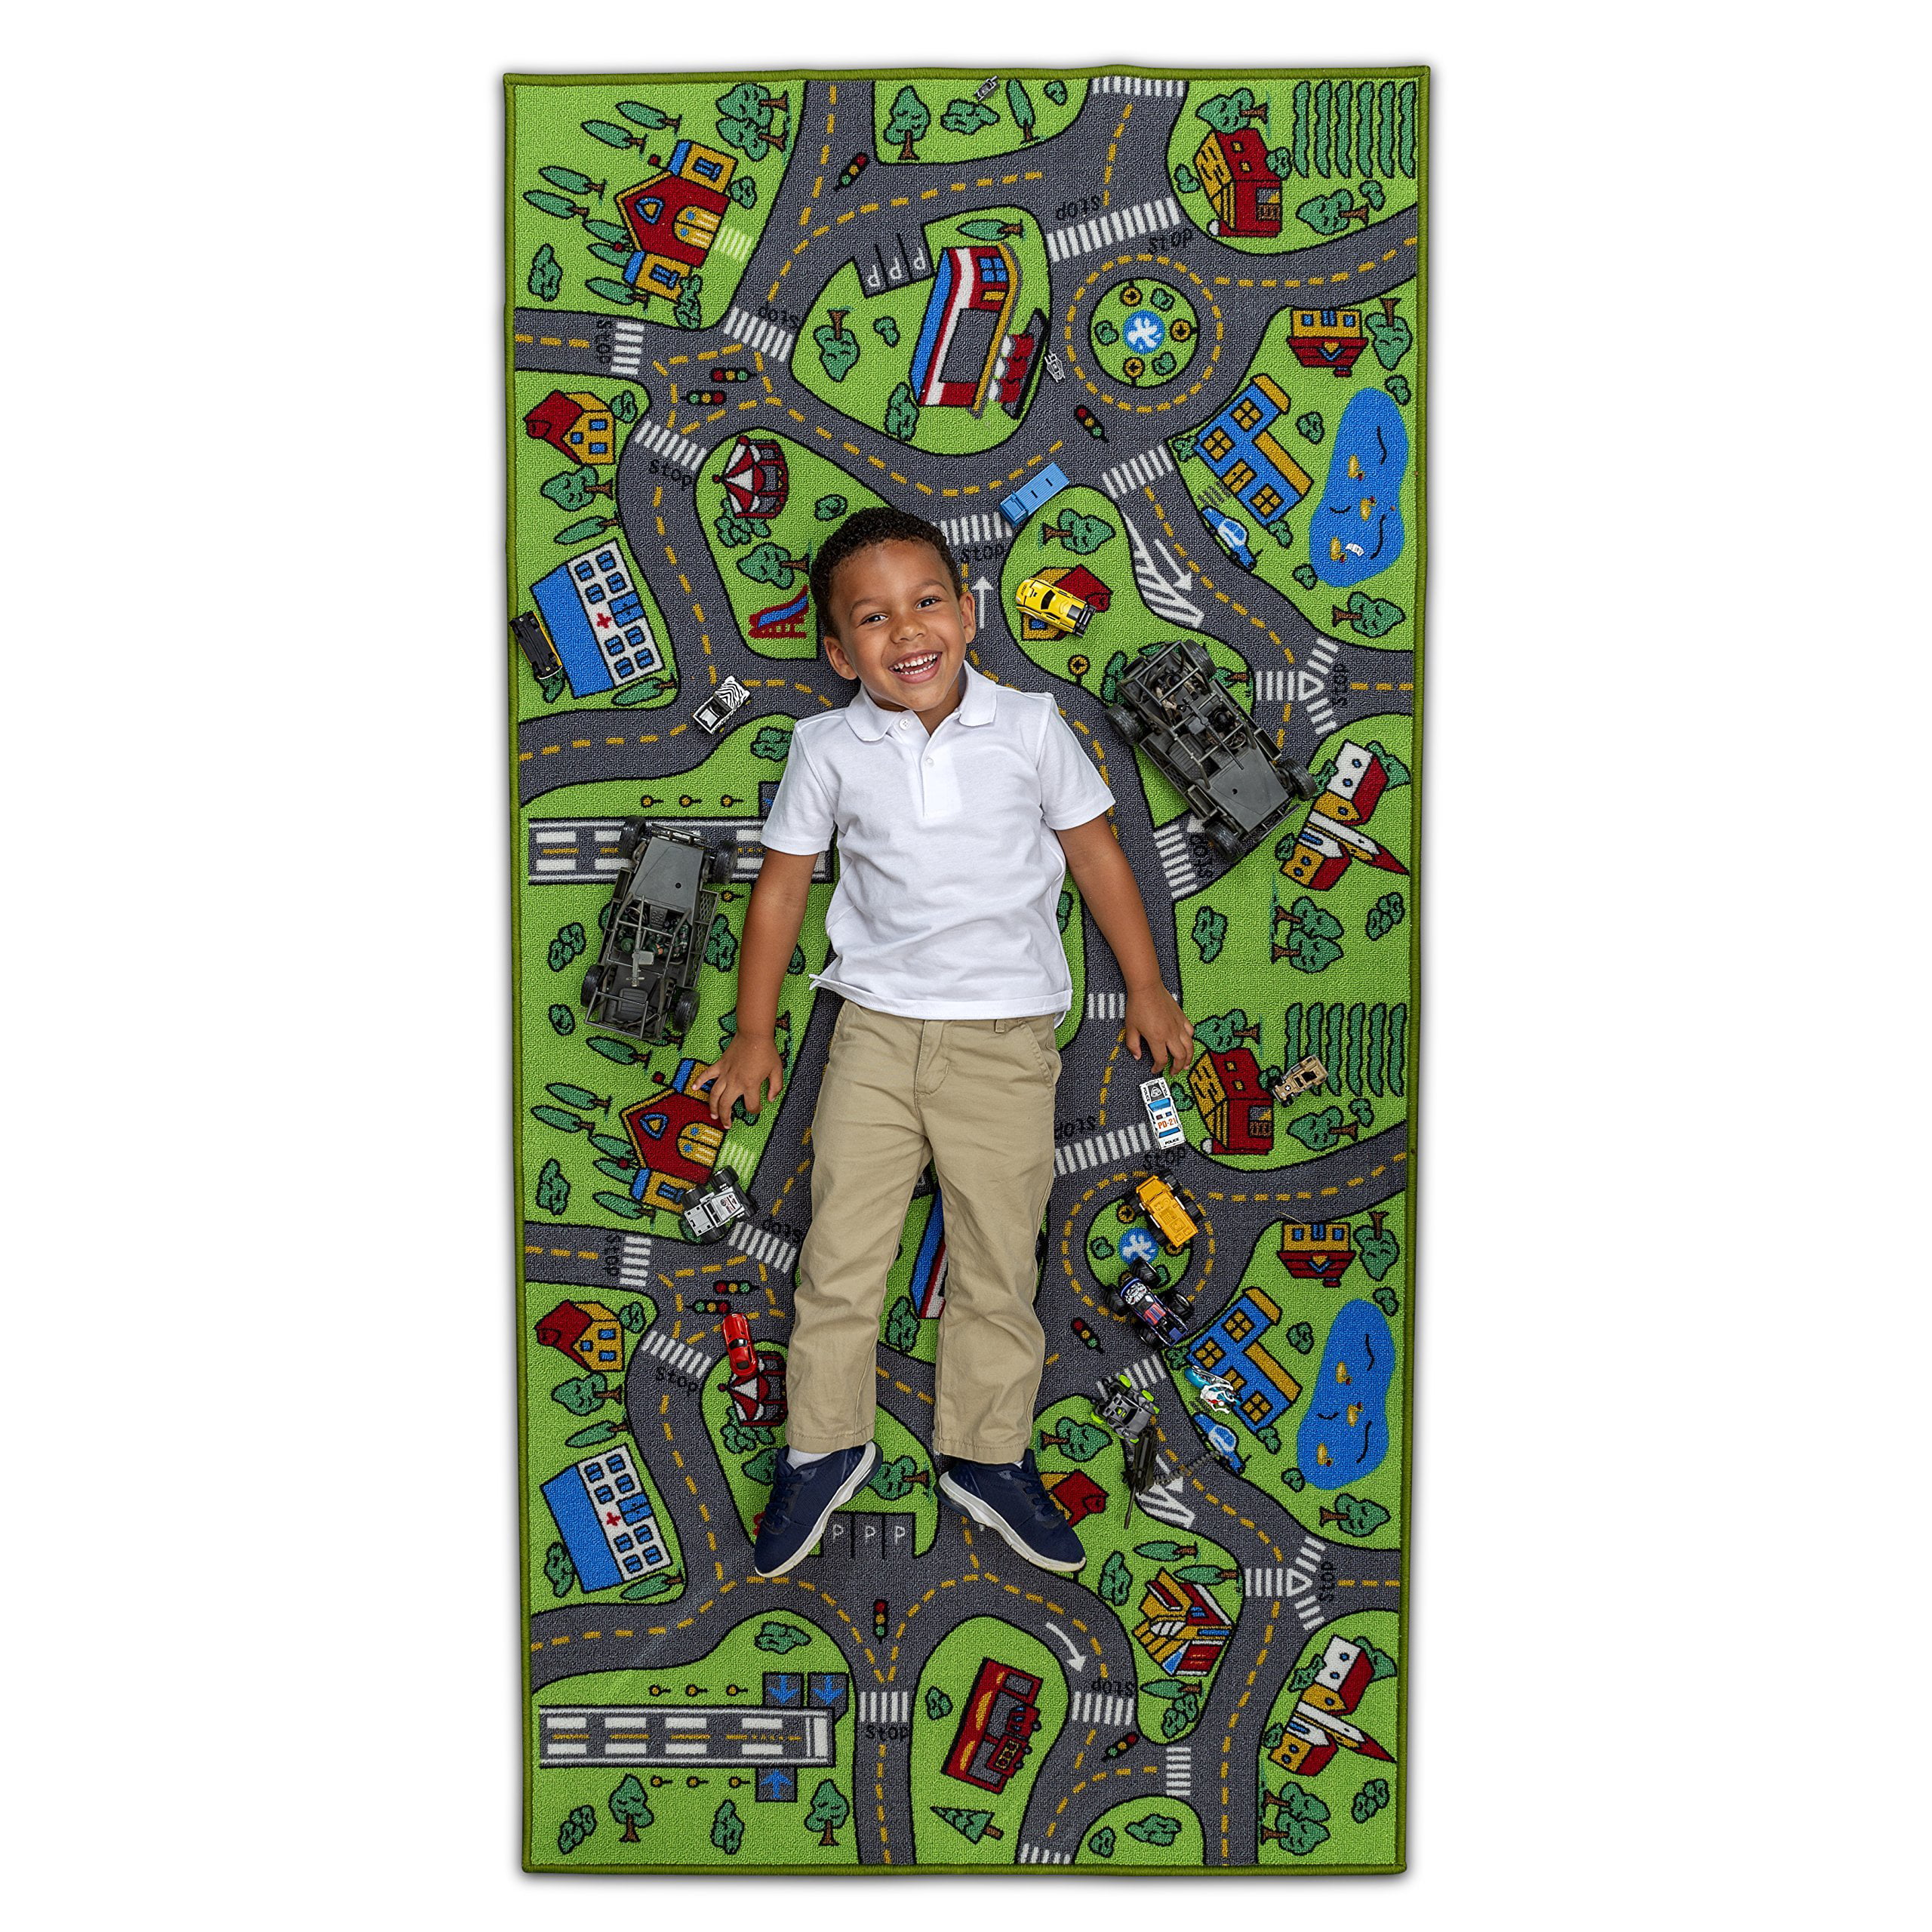 Road Traffic System Bedroom Playroom Kids Carpet Extra Large 80 x 40 Playmat City Life Children's Educational Area Play Mat Rug Great for Playing with Cars Multi Color Learn & Have Fun Safe